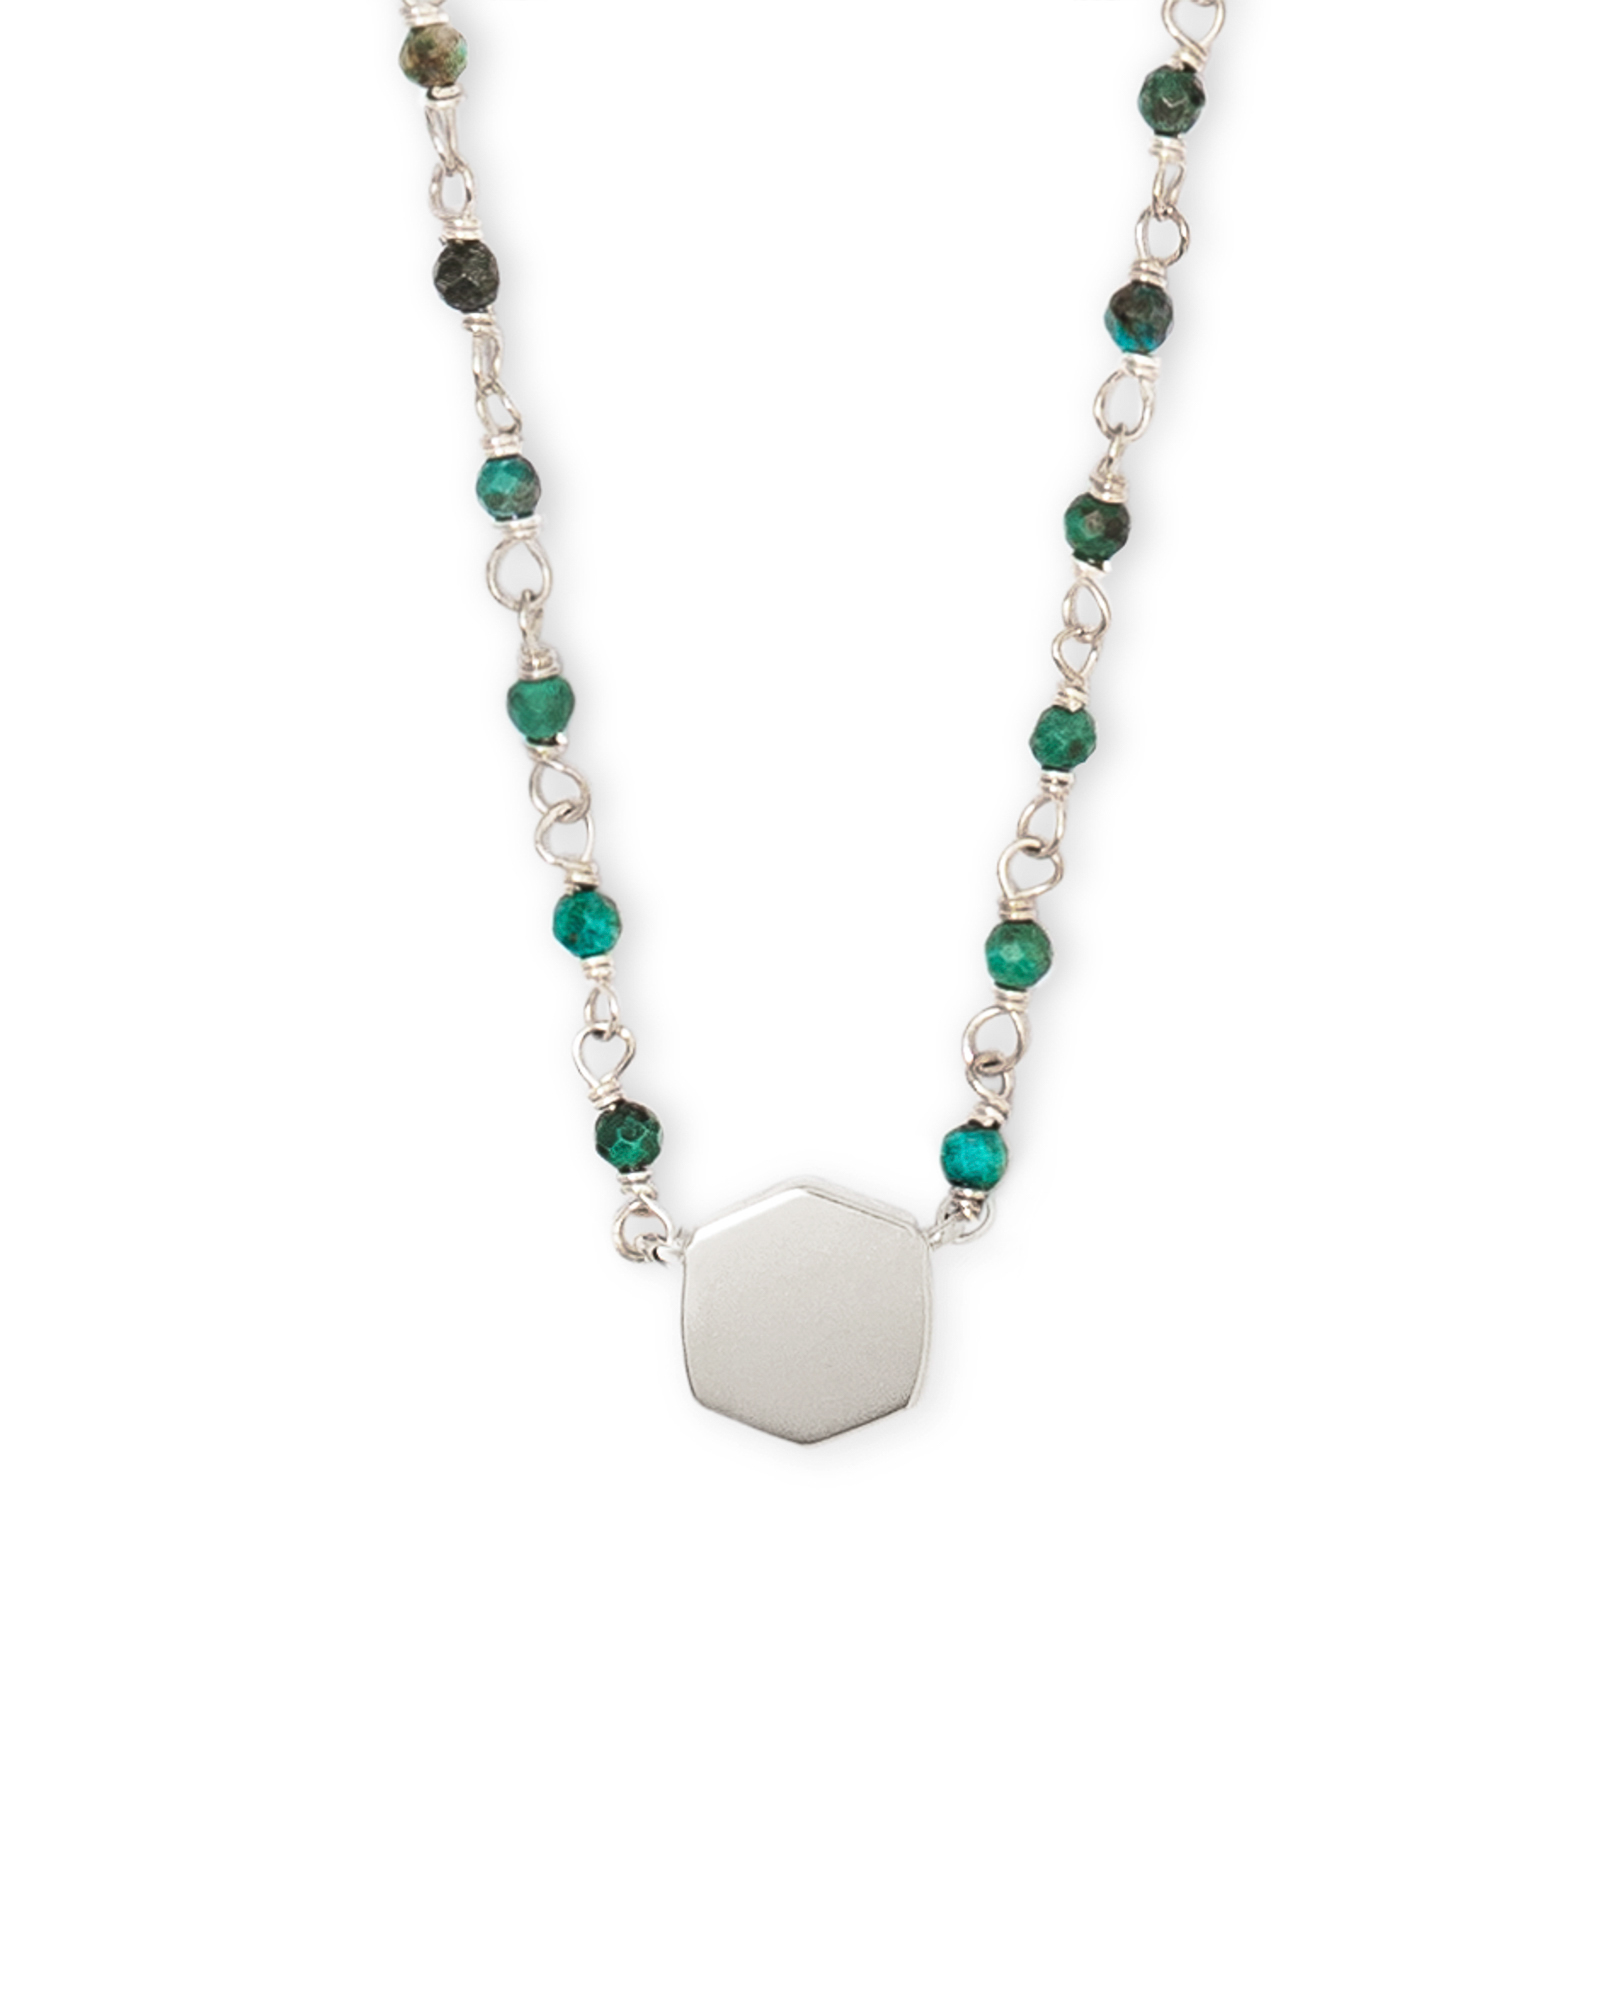 Davis Sterling Silver Beaded Pendant Necklace in Turquoise